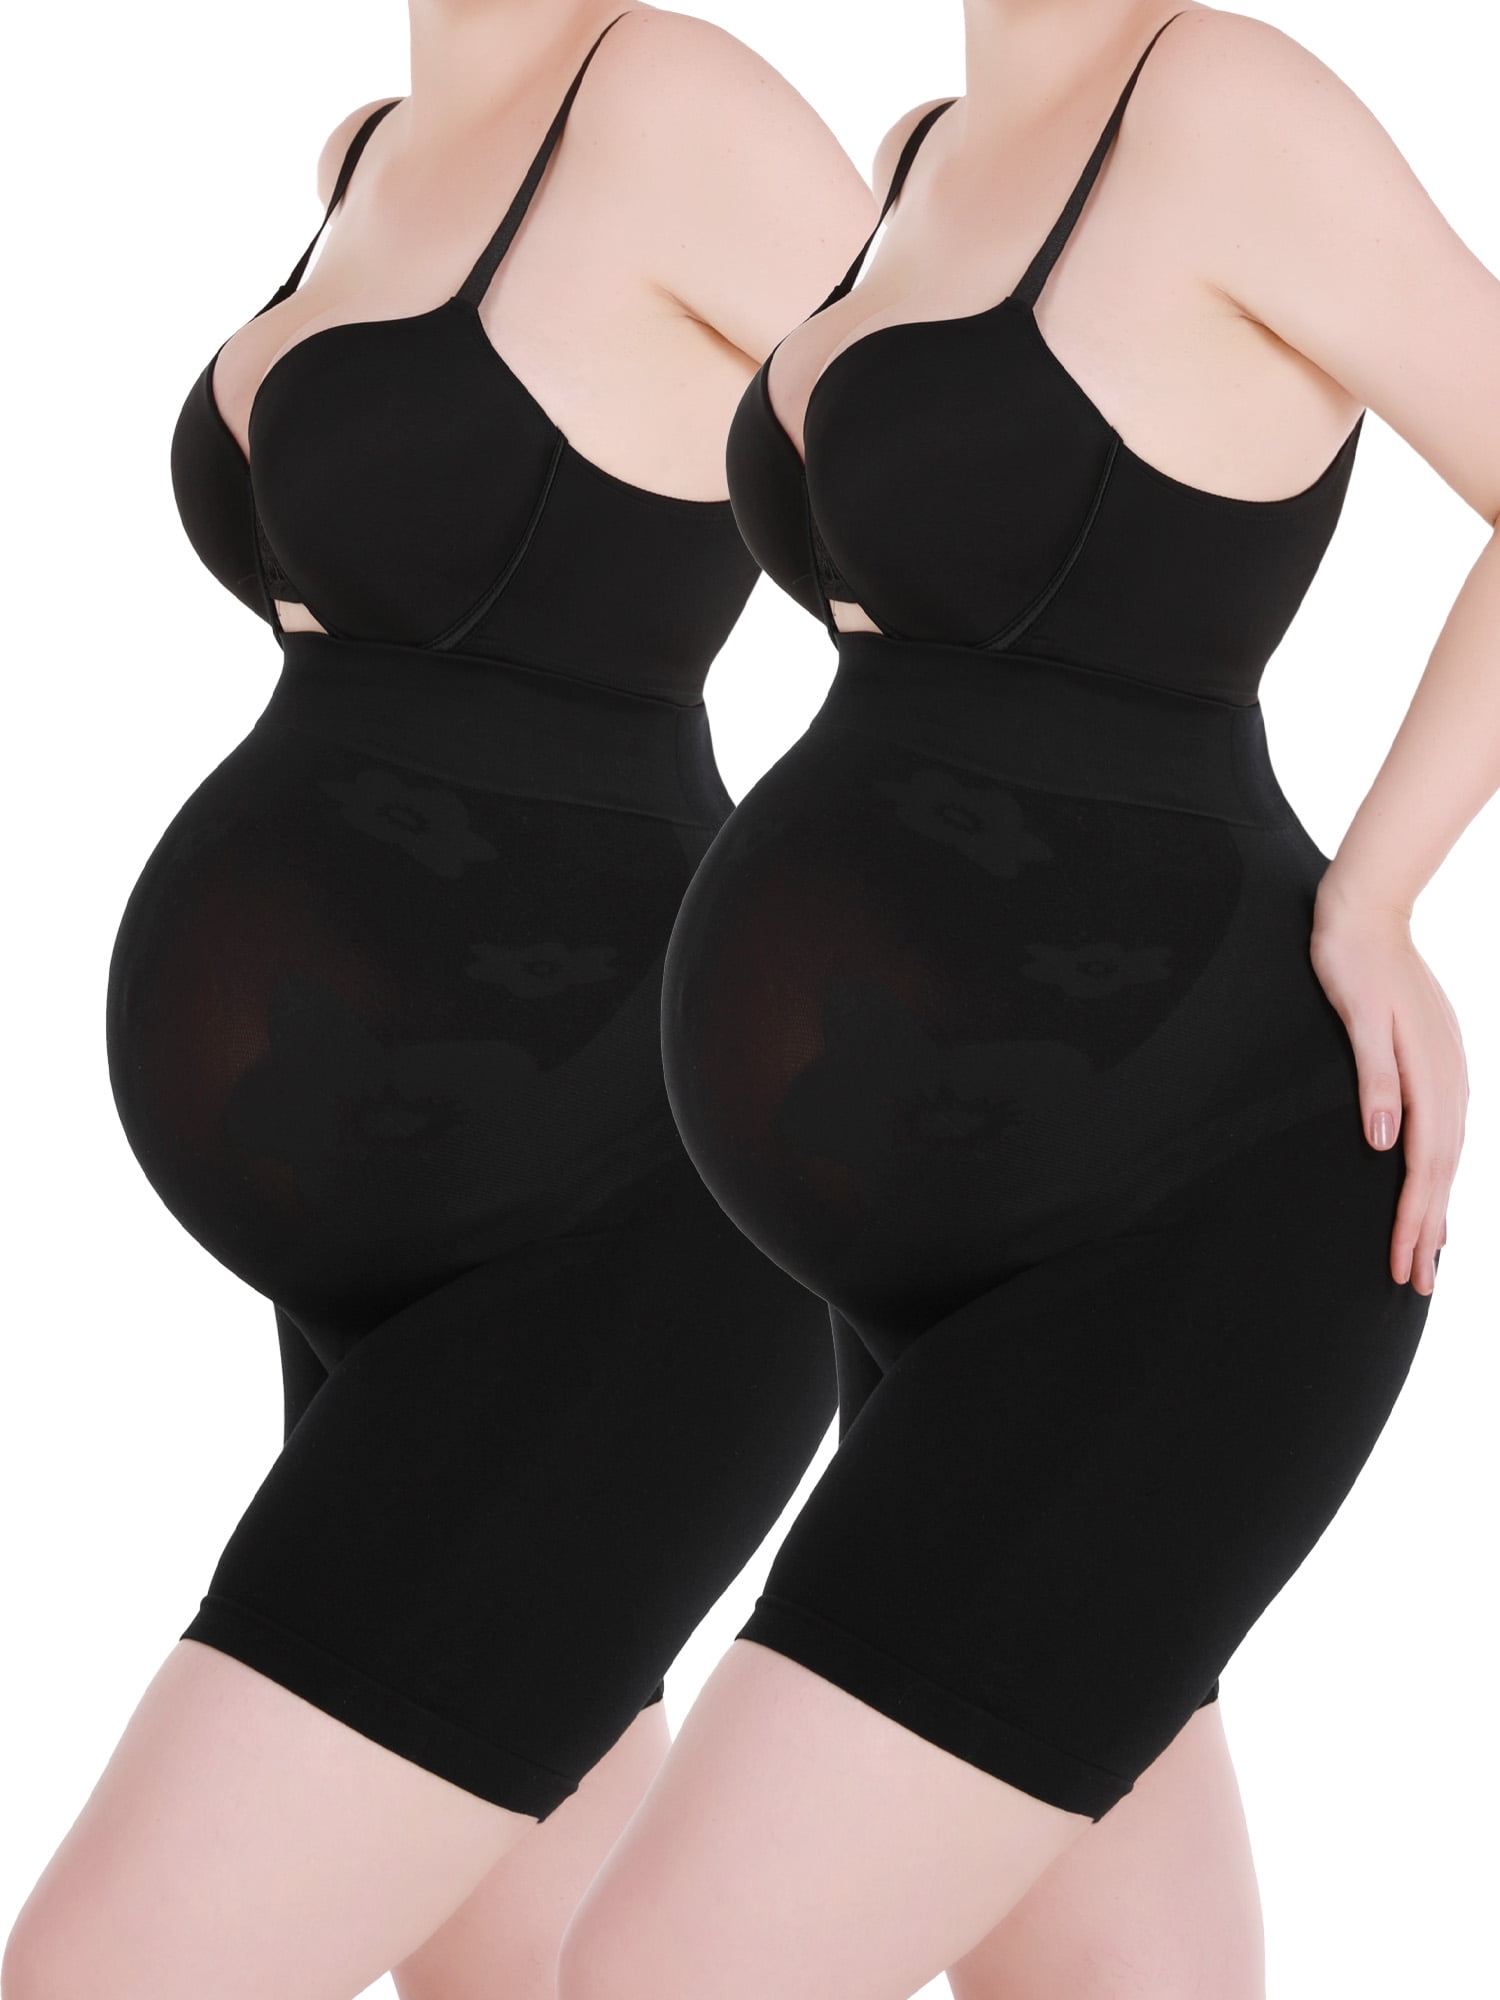 High Waisted Mid-Thigh Pregnancy Underwear Prevent Chaffing Soft Adominal Support “Baby Bump” Premium Maternity Shapewear 